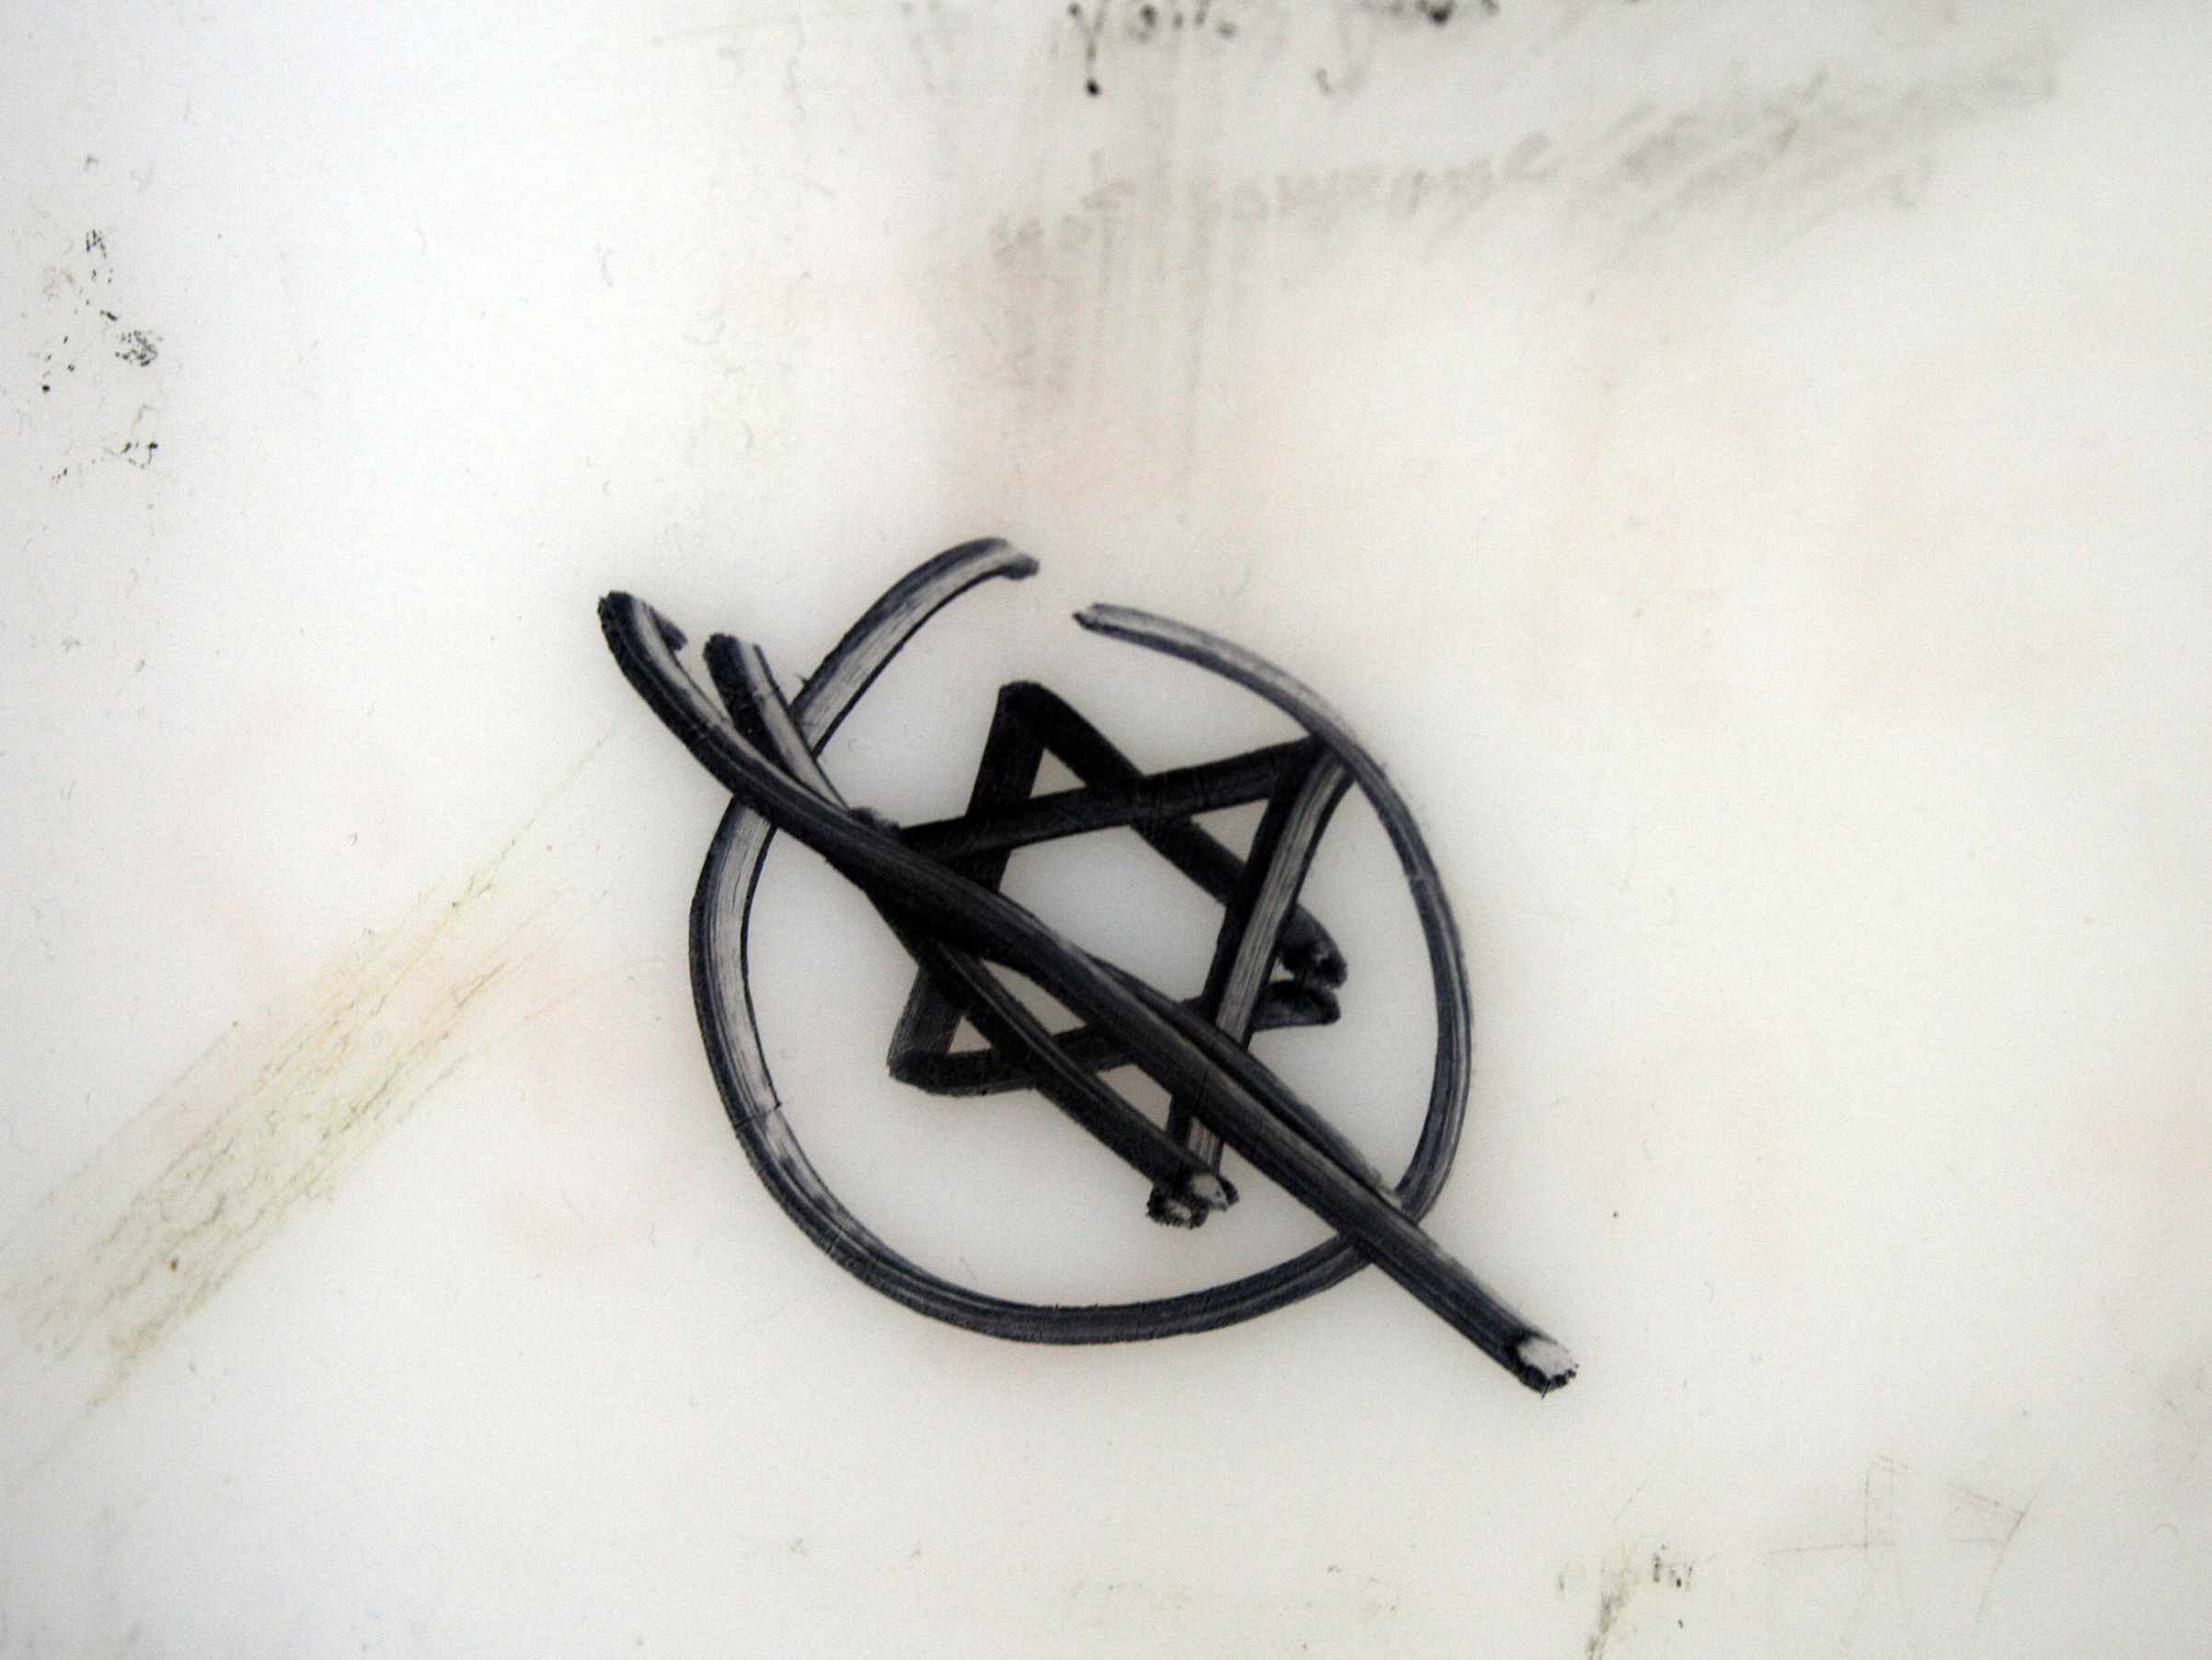 Rising Antisemitism in a Global Context